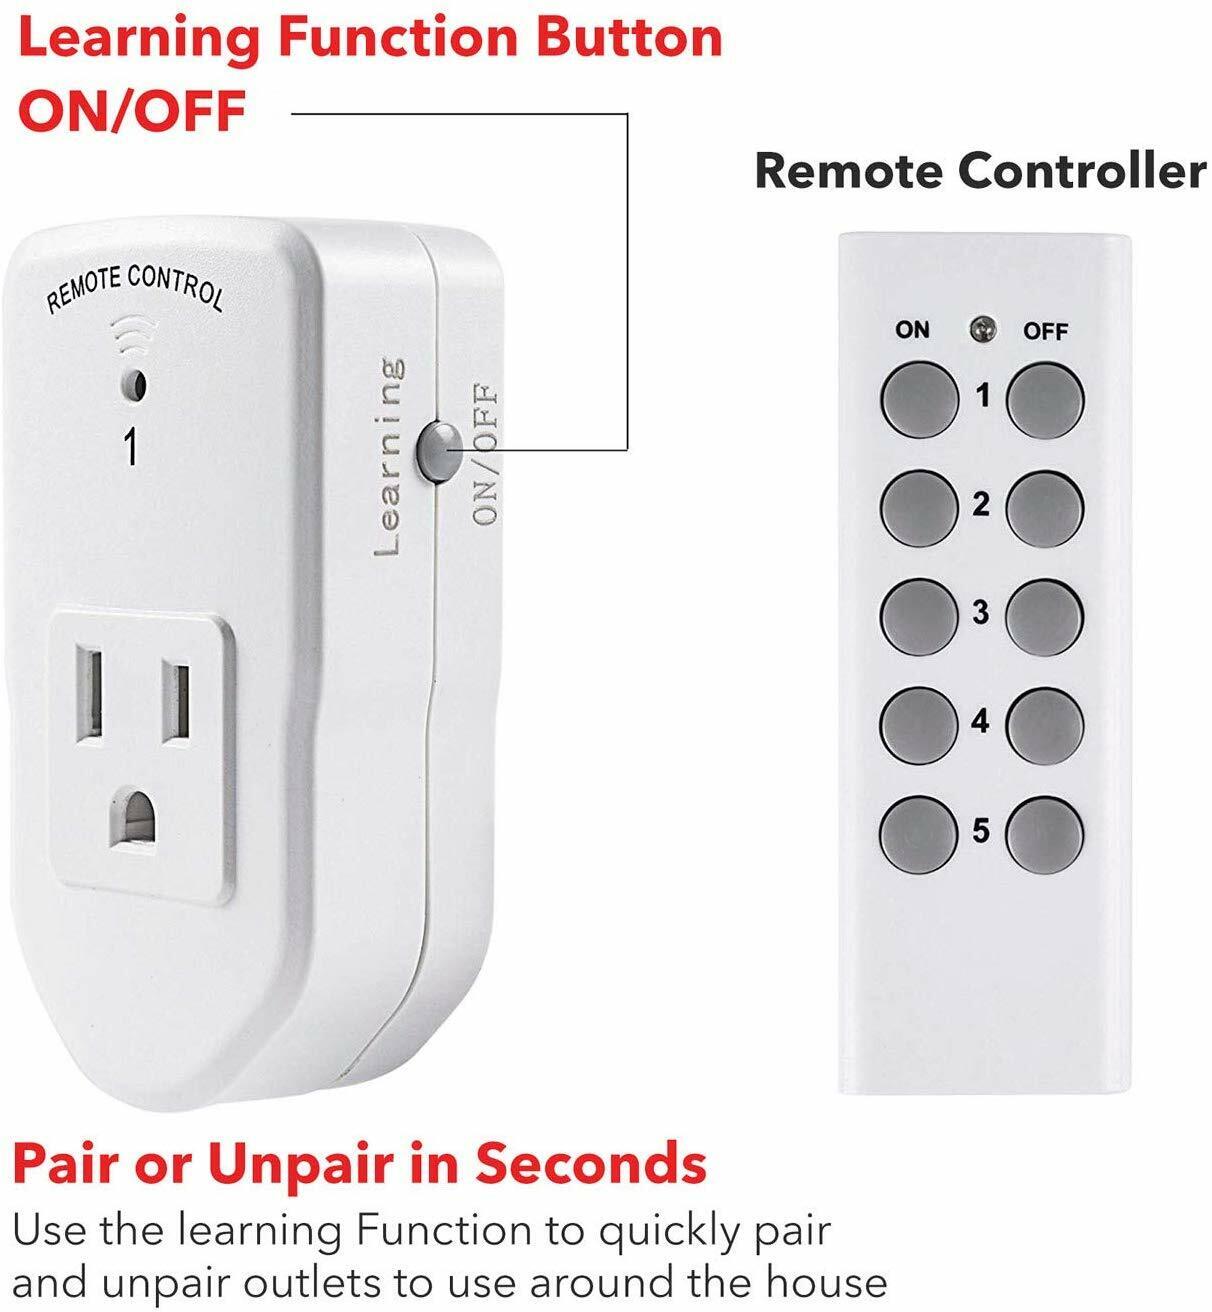 BN-LINK Wireless Remote Control Outlet Switch Power Plug In for lights LED bulbs BN-LINK BNRU117 - фотография #3